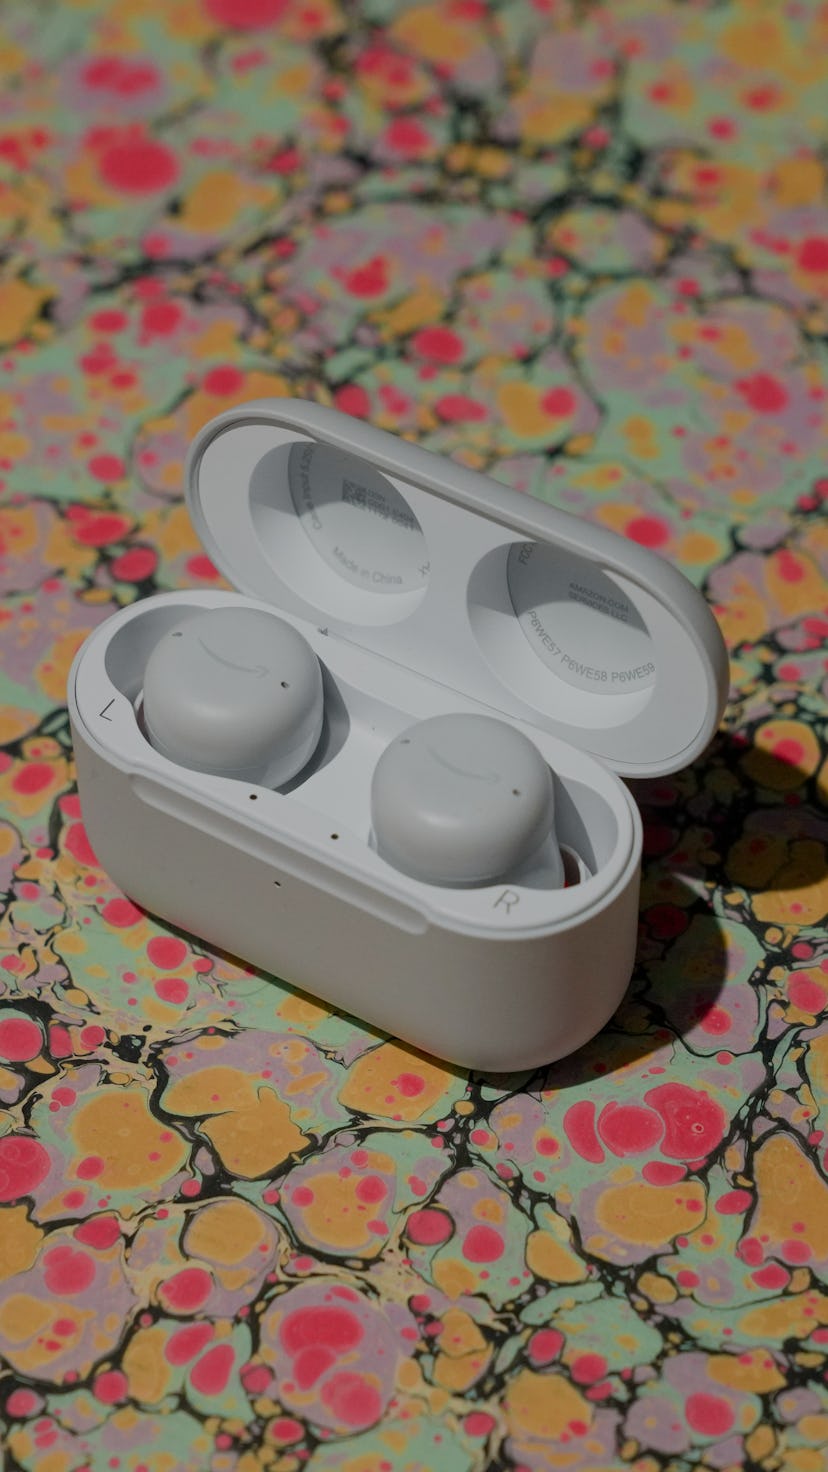 Echo Buds 2 review: these active noise cancellation wireless earbuds are really good